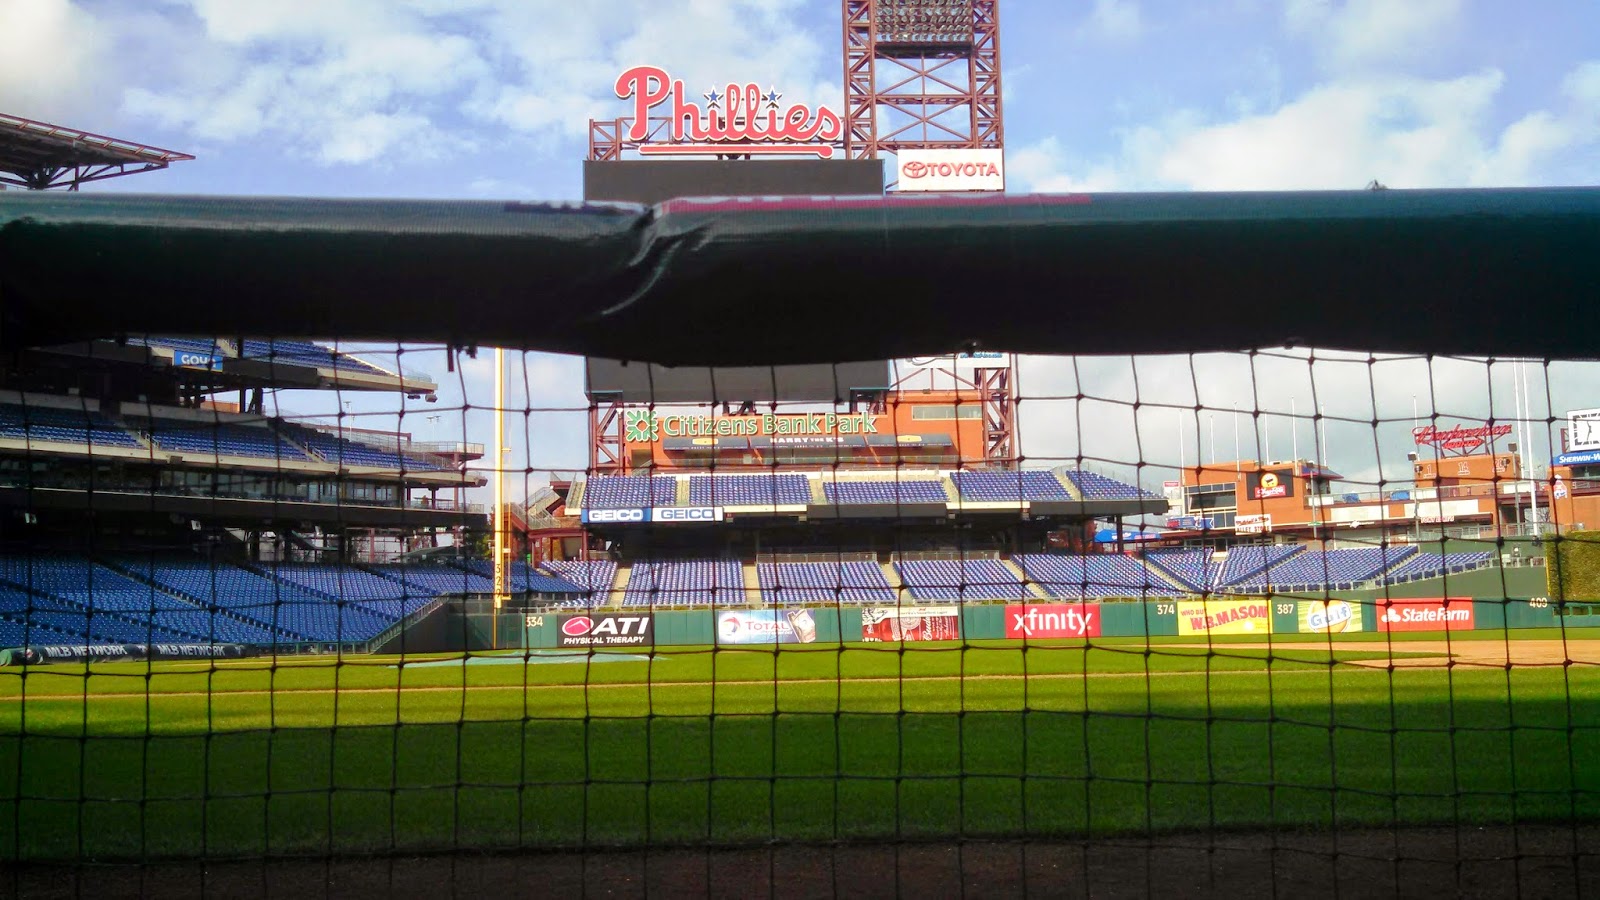 Where to Eat at Citizens Bank Park in Philadelphia